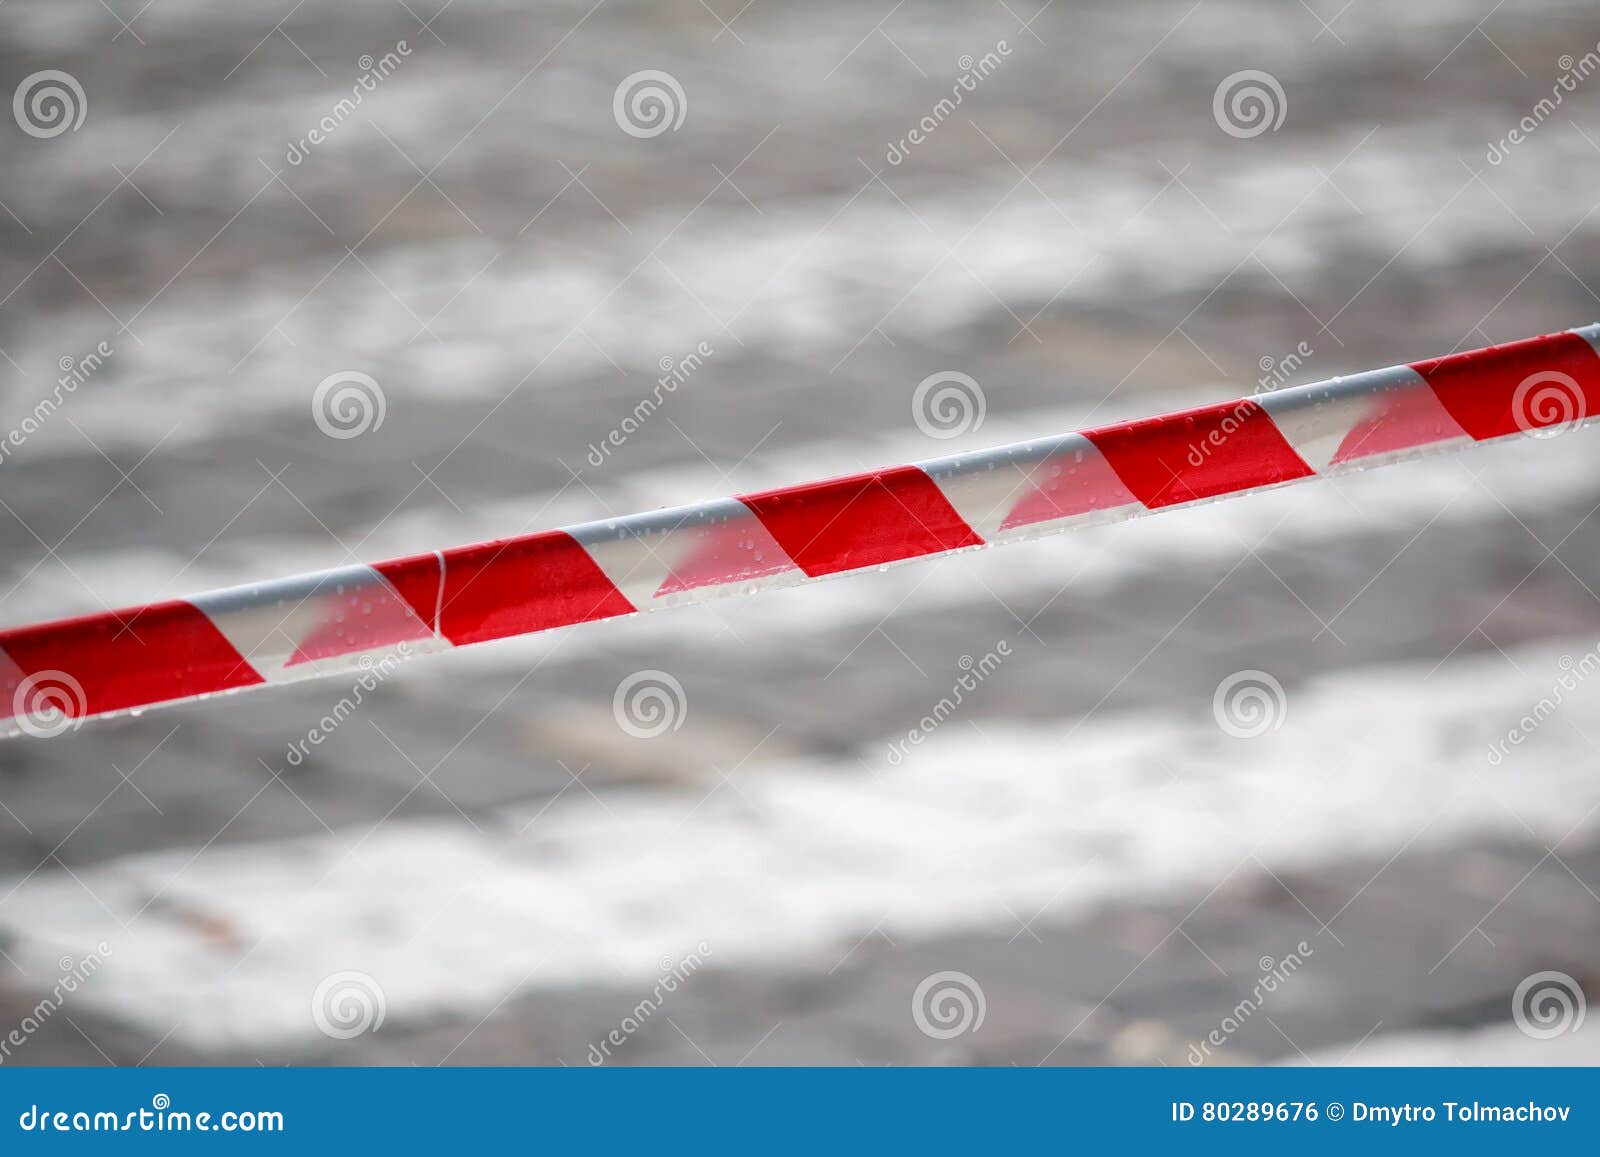 fencing red and white ribbon which prohibits movement